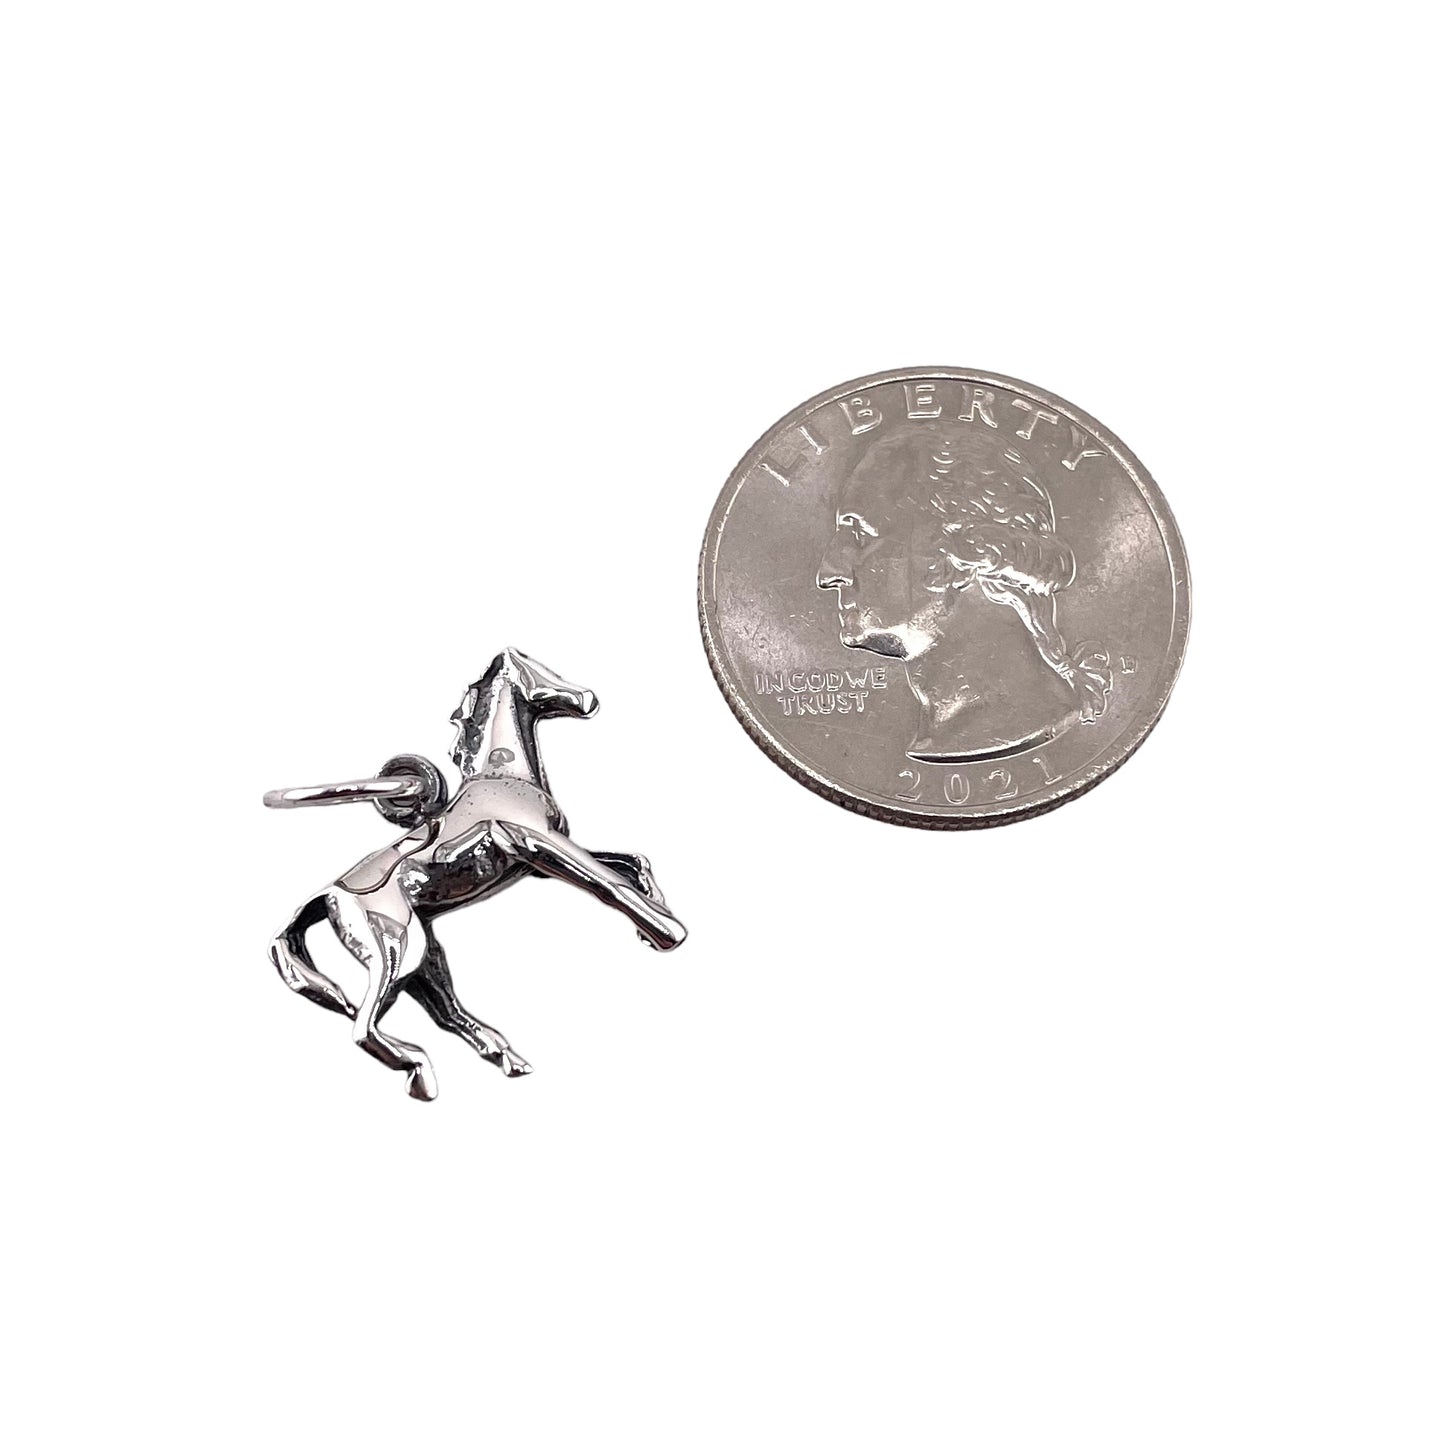 Standing Horse Pendant Sterling Silver